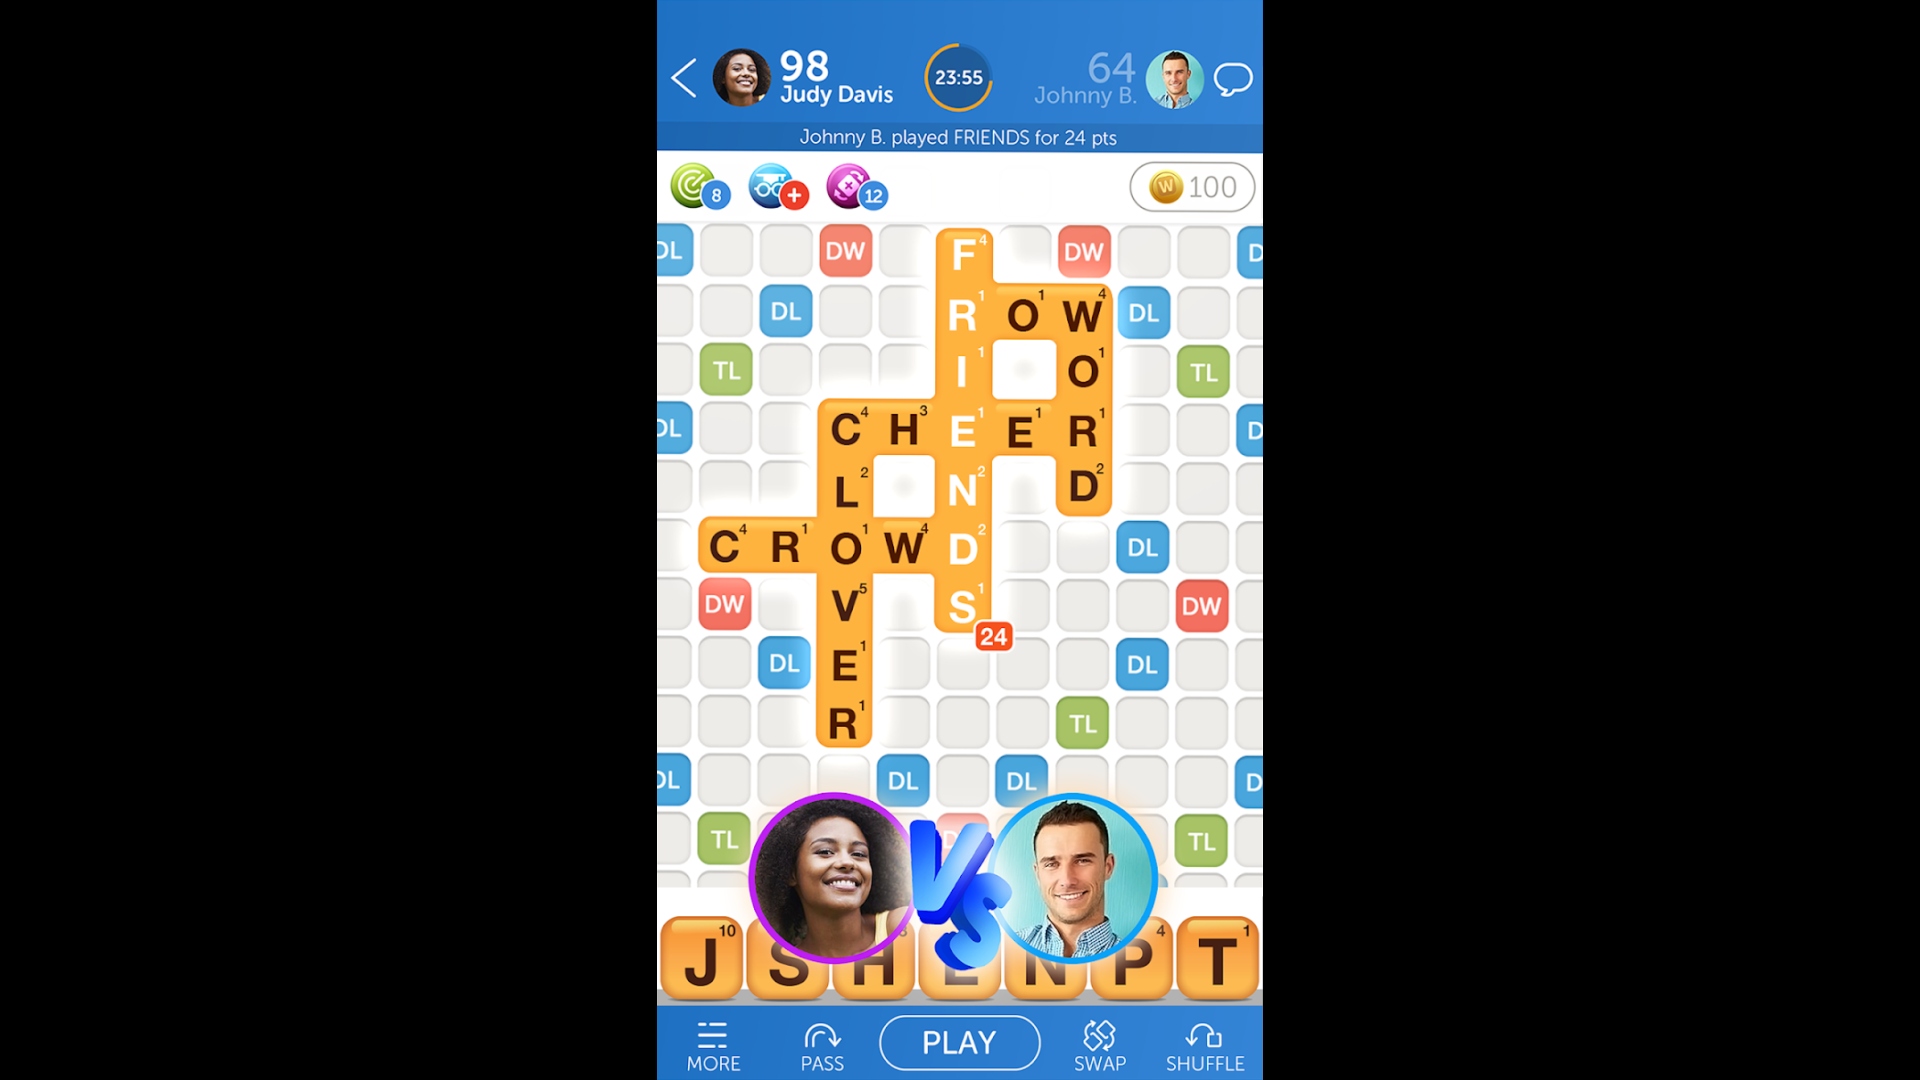 Best word games - Words with Friends. A screenshot shows a match between two people named Judy Davis and Johnny B.